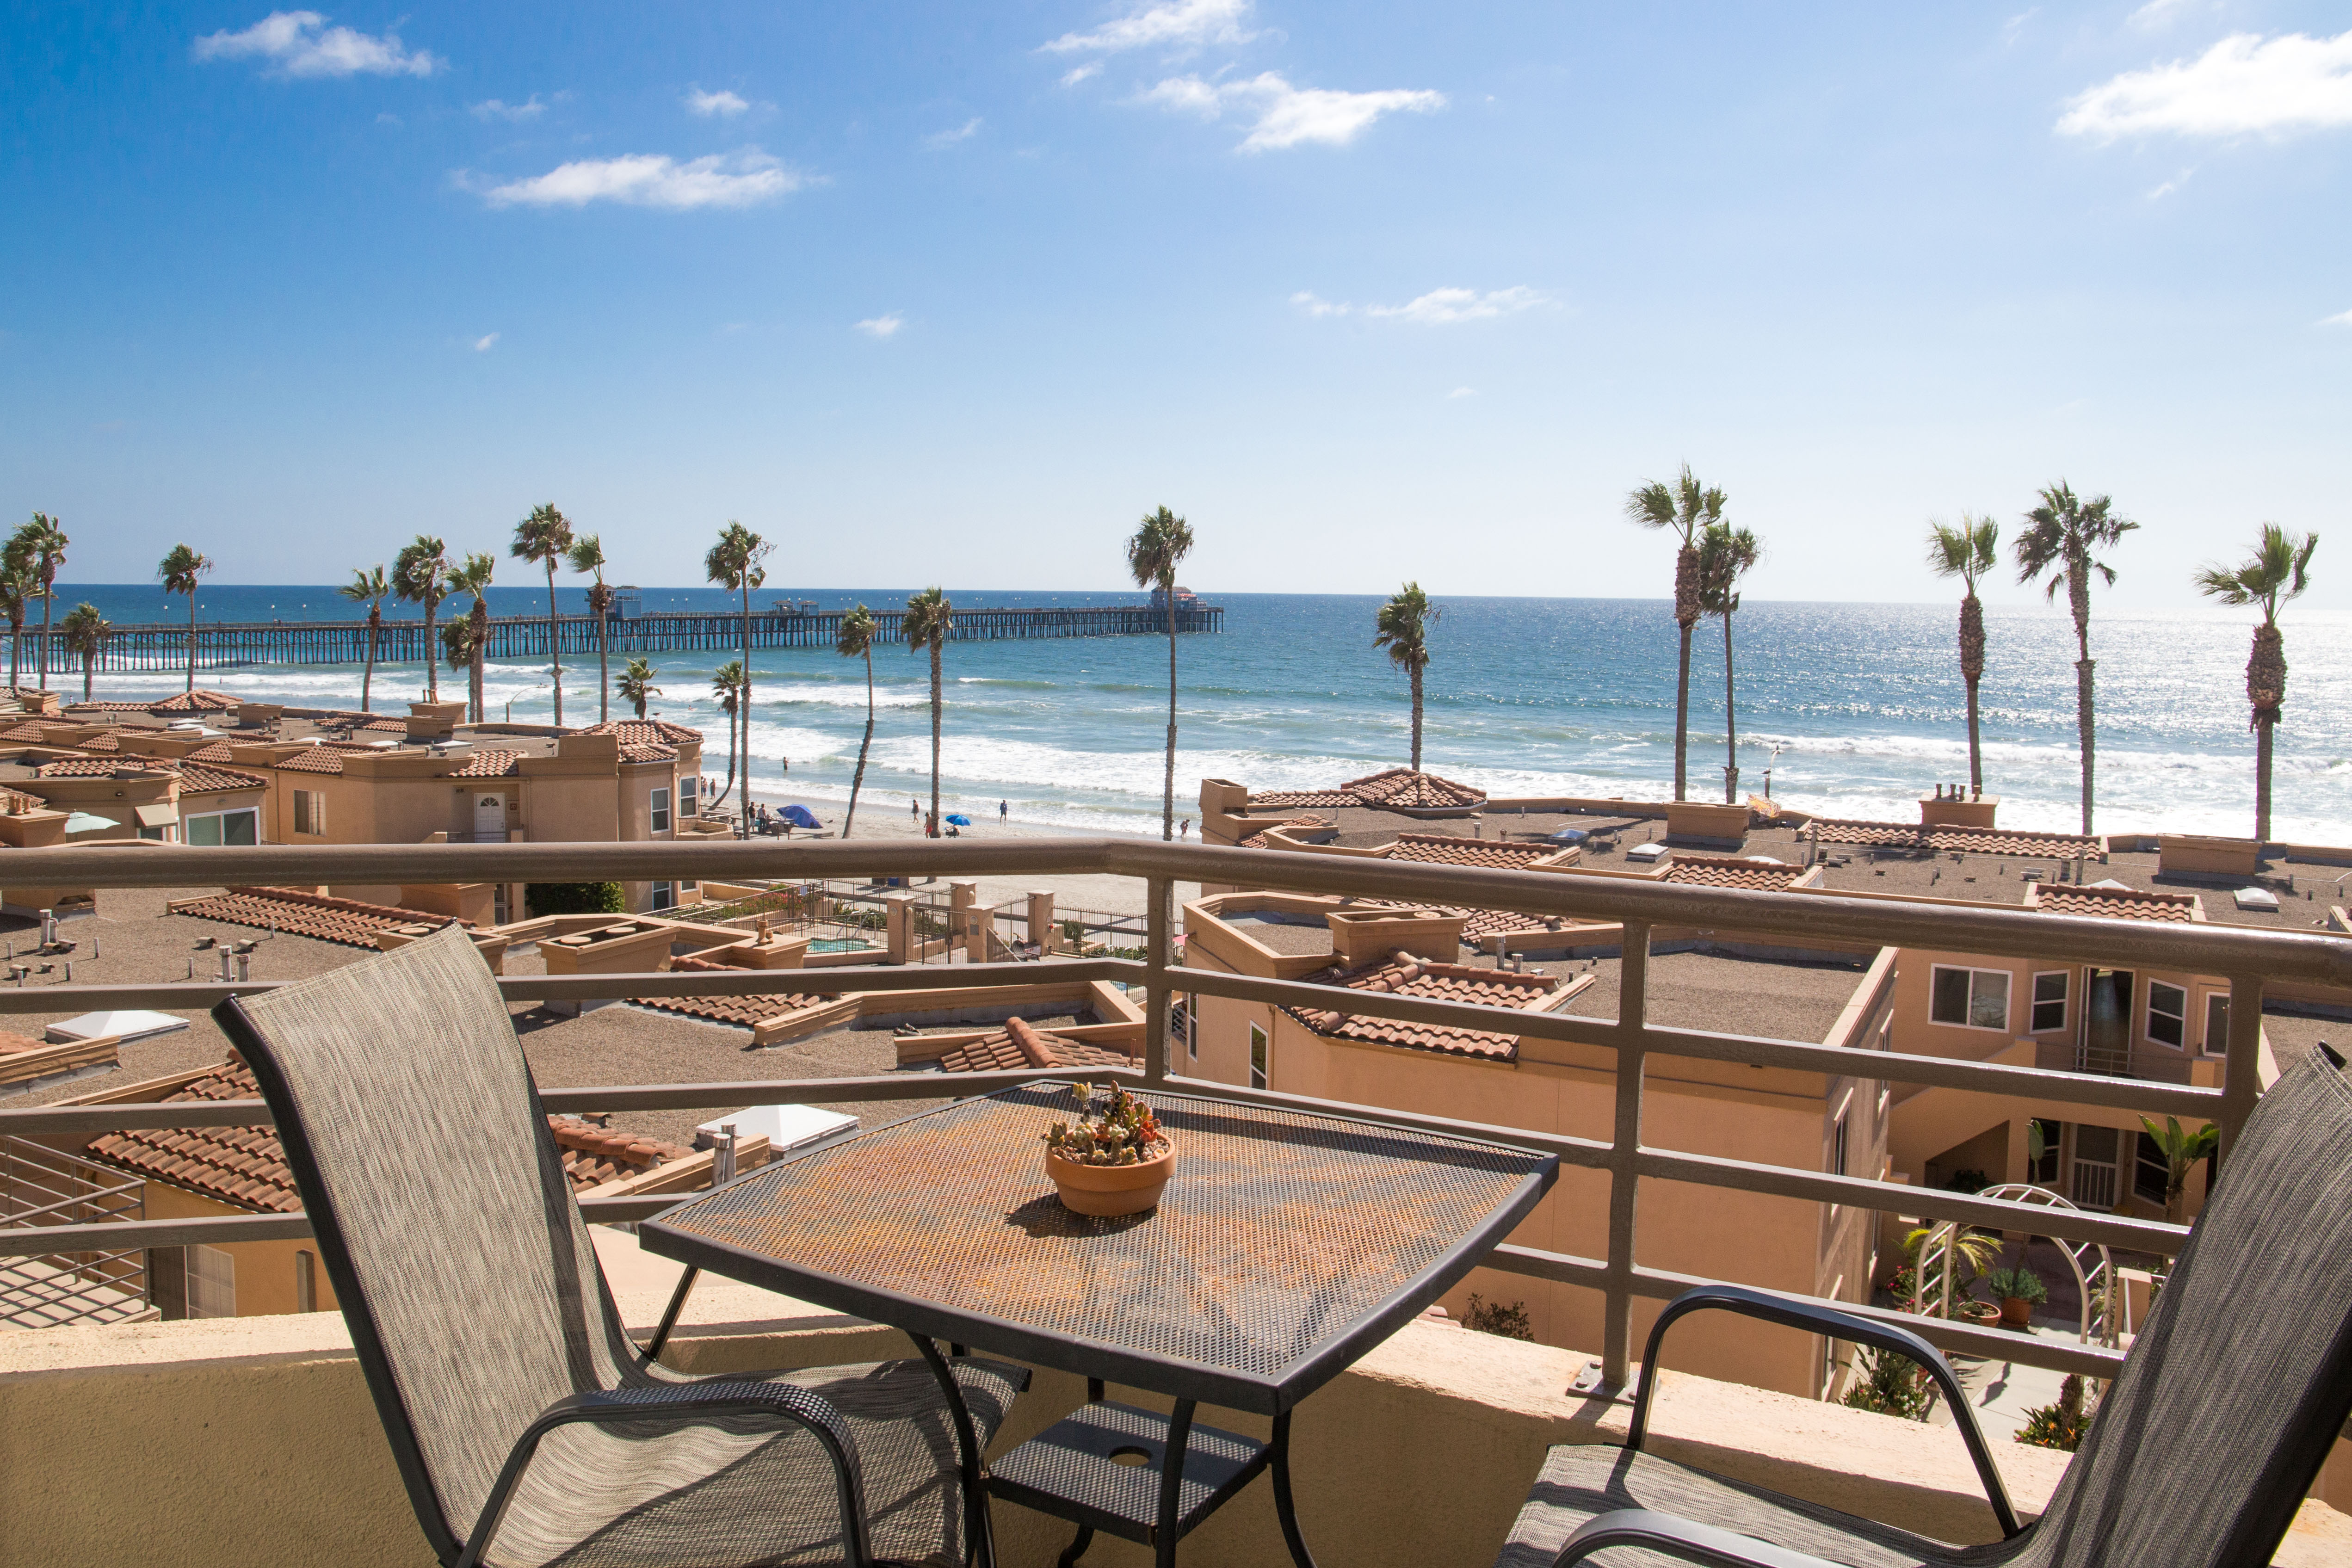 SOLD! Beach lover’s paradise! Just Listed 501 N. Pacific St. #16 @ OCEANSIDE